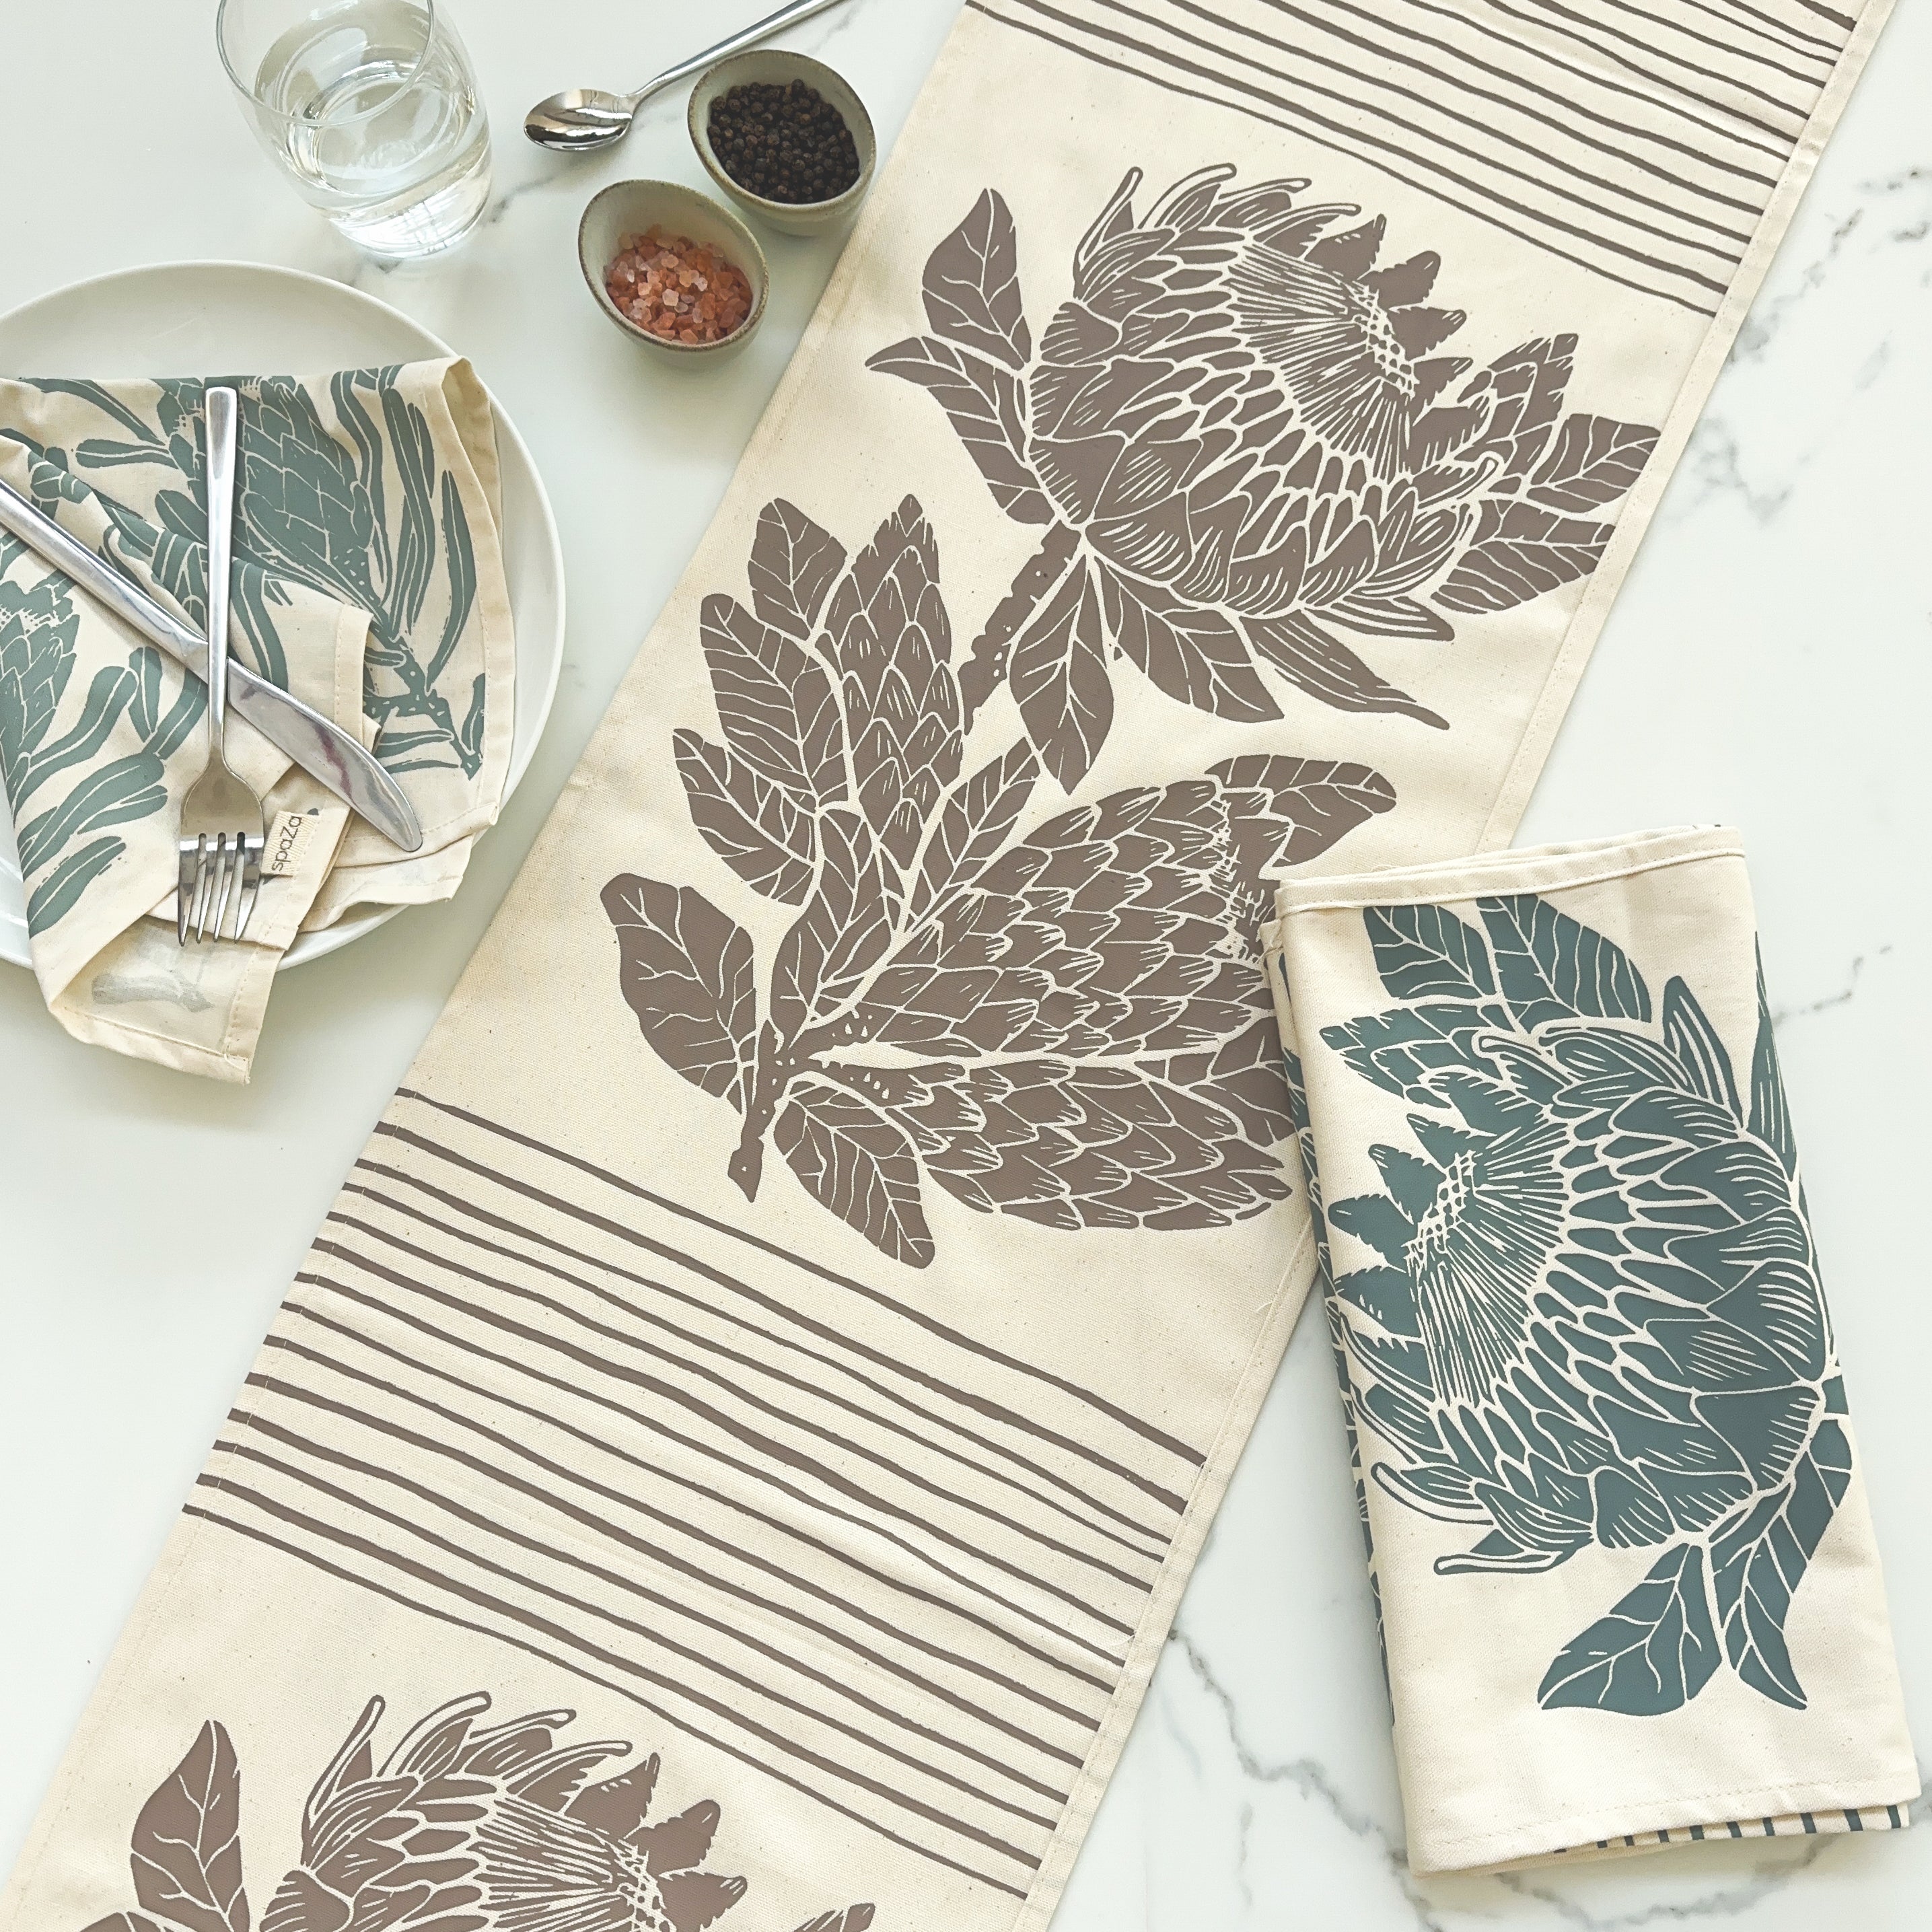 Table Runner Protea Print | tablecloth and table decor